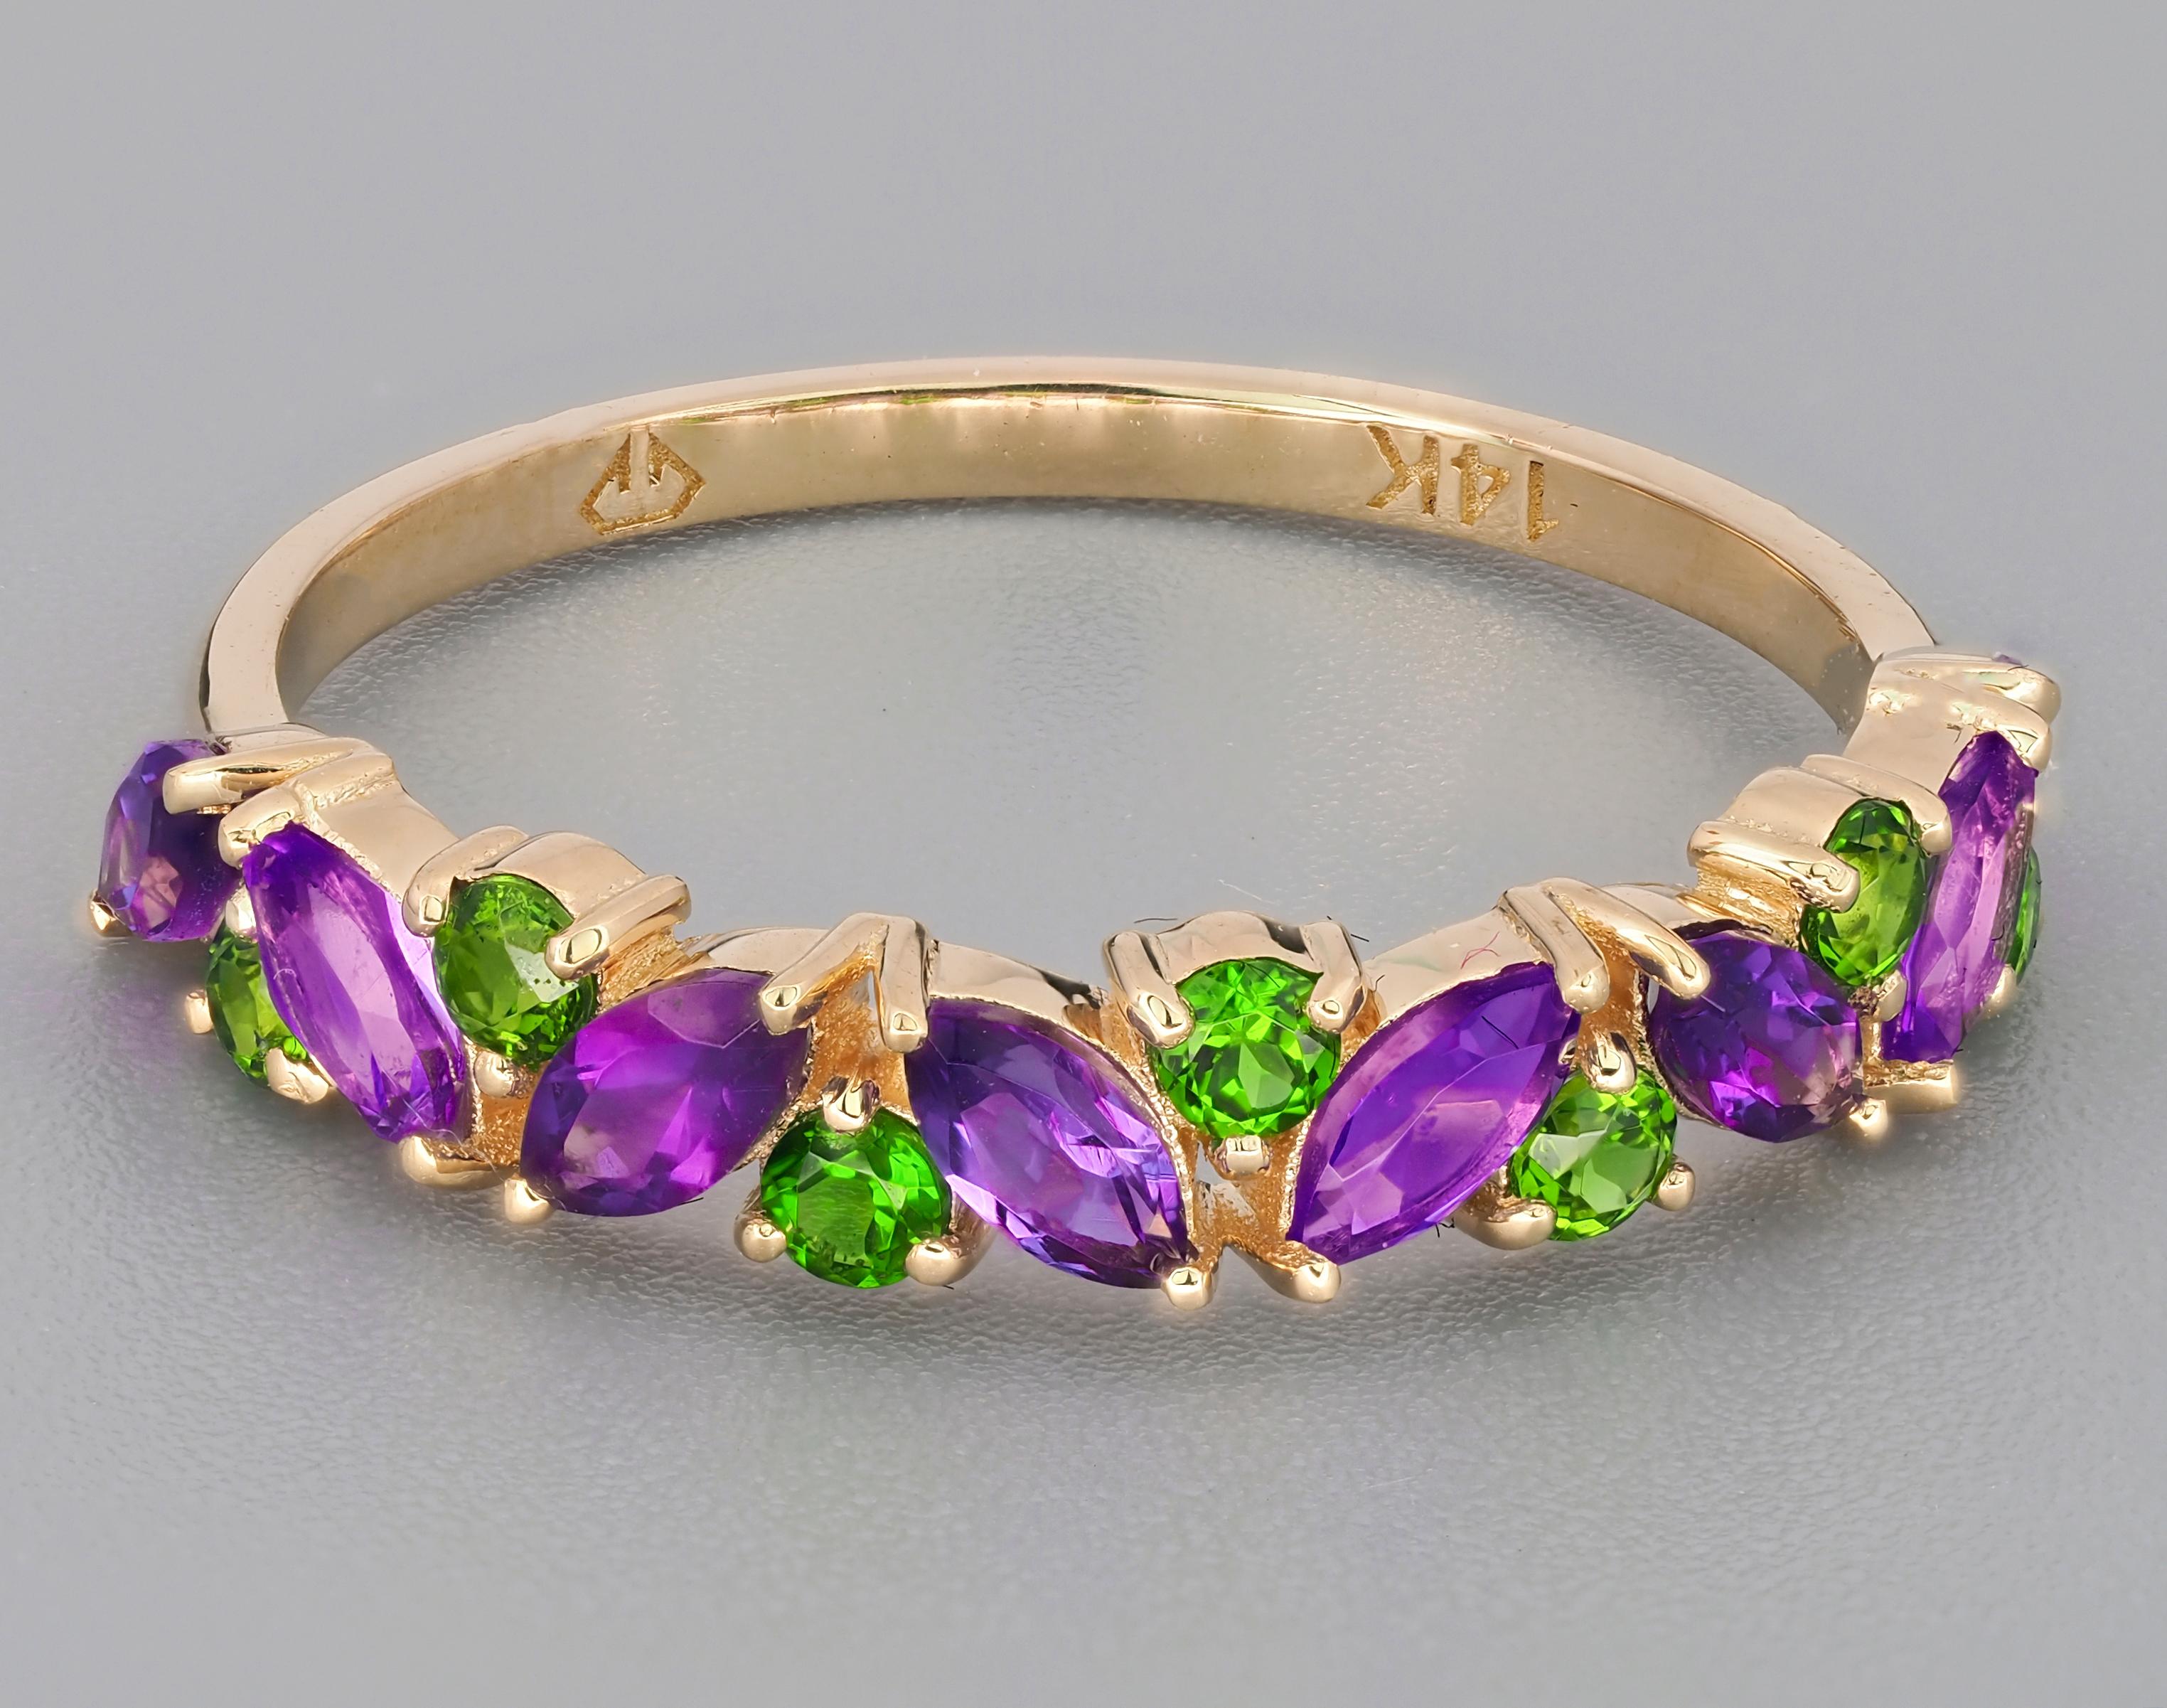 For Sale:  14k Gold Half Eternity Ring with Natural Amethyst and Chrome Diopside 3